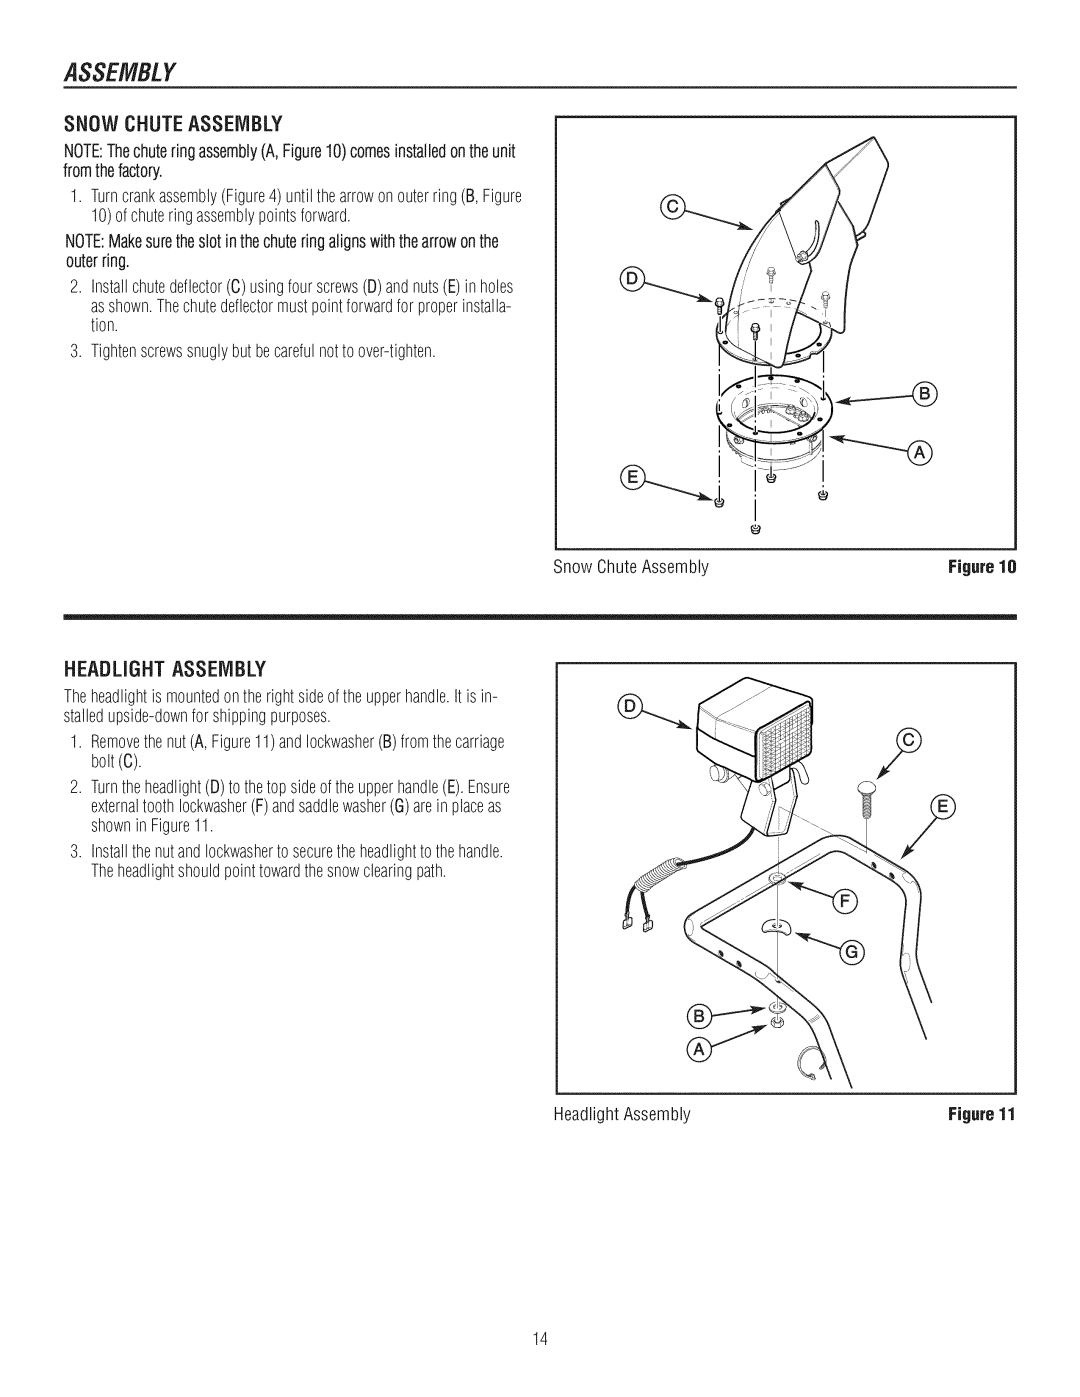 Craftsman C950-52943-0 owner manual Snow Chuteassembly, Figure, Headlight Assembly 